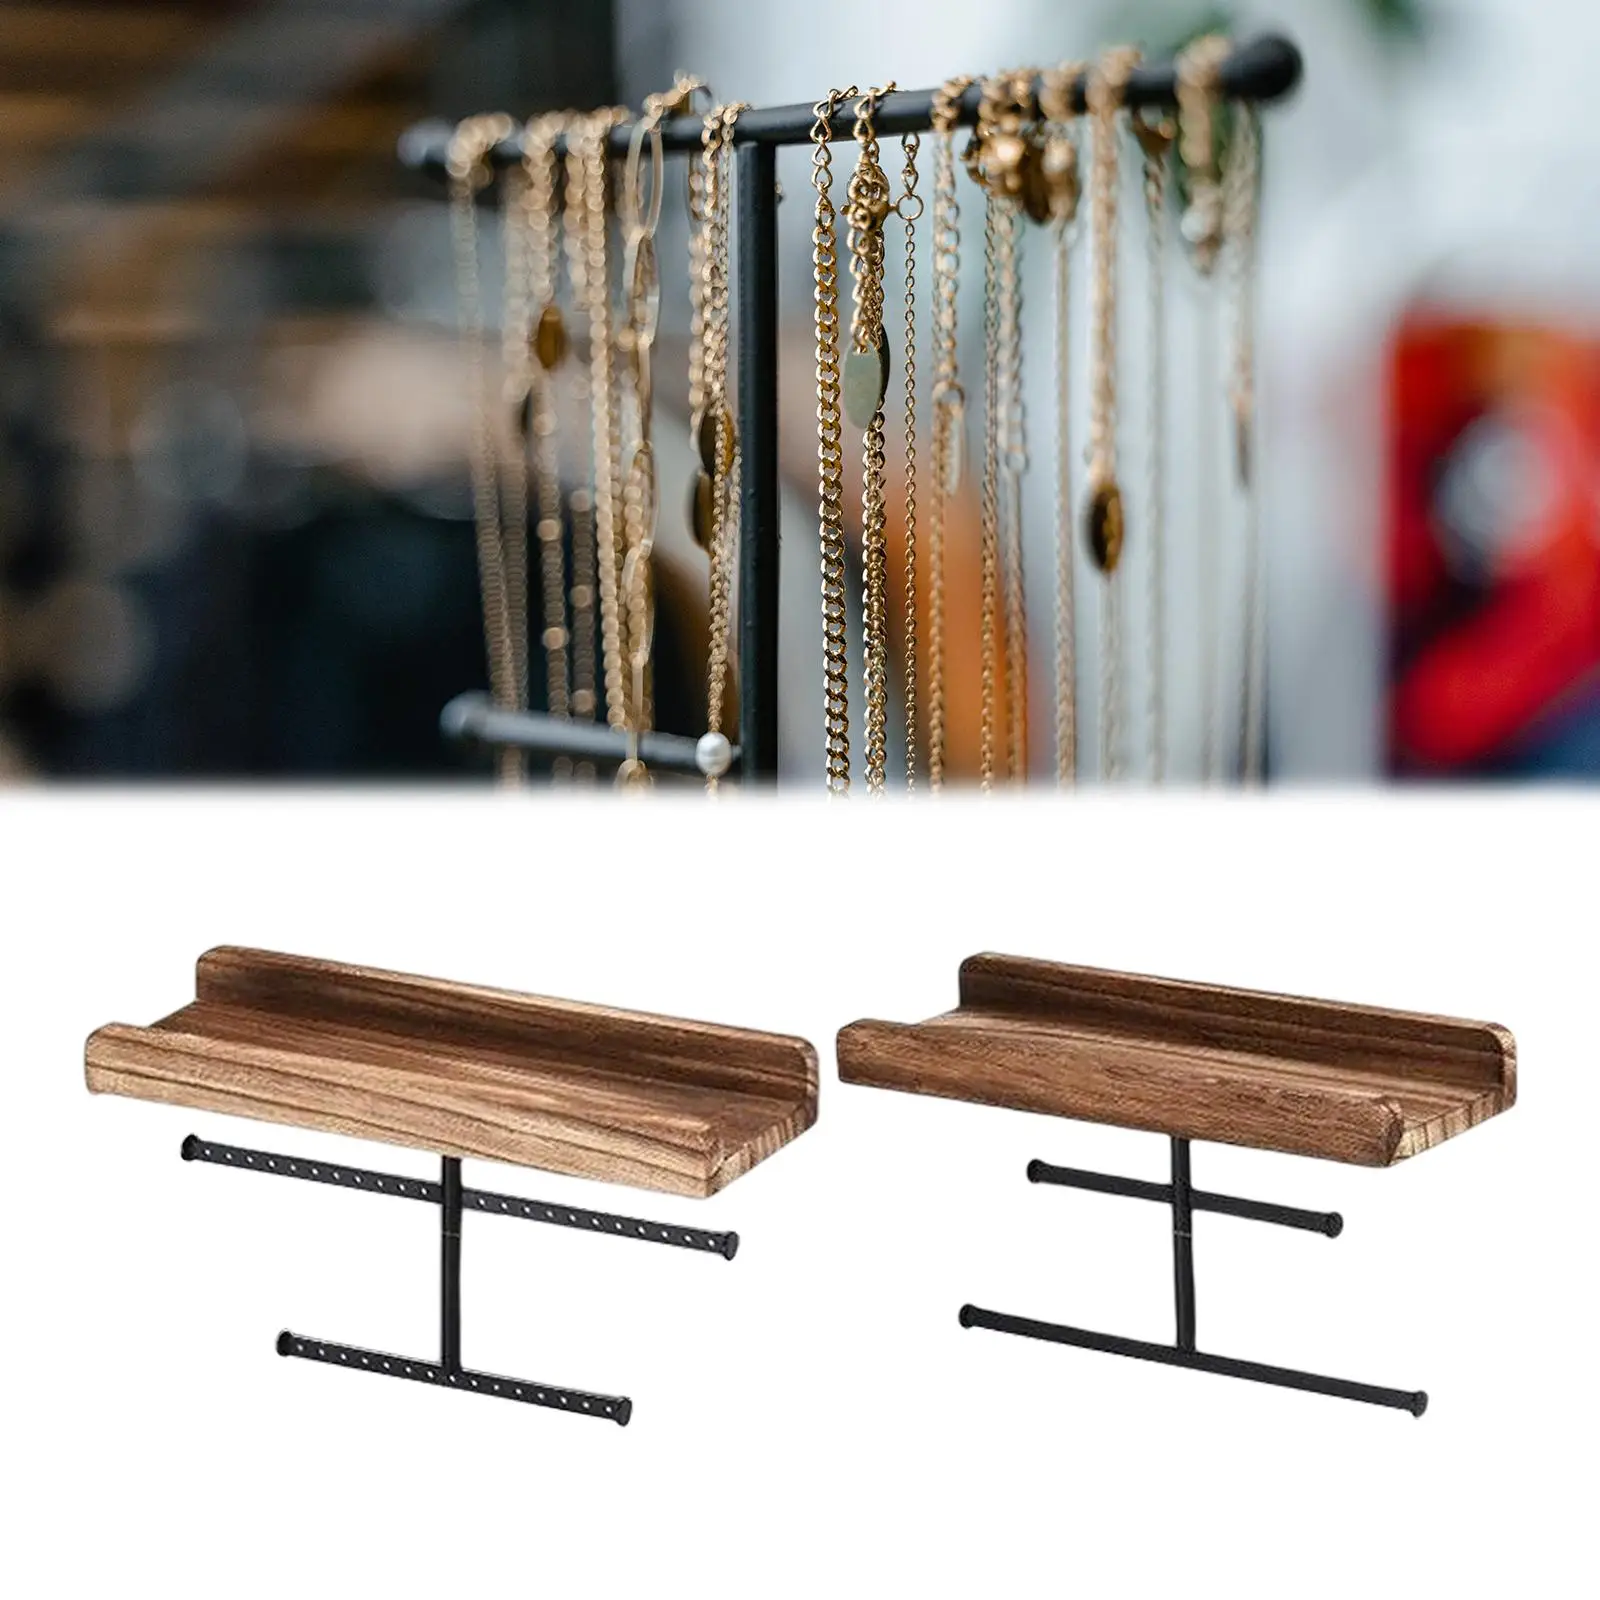 2x Hanging Wall Mounted Jewelry Organizer Rustic Wood Elegant Rack for Rings Watch